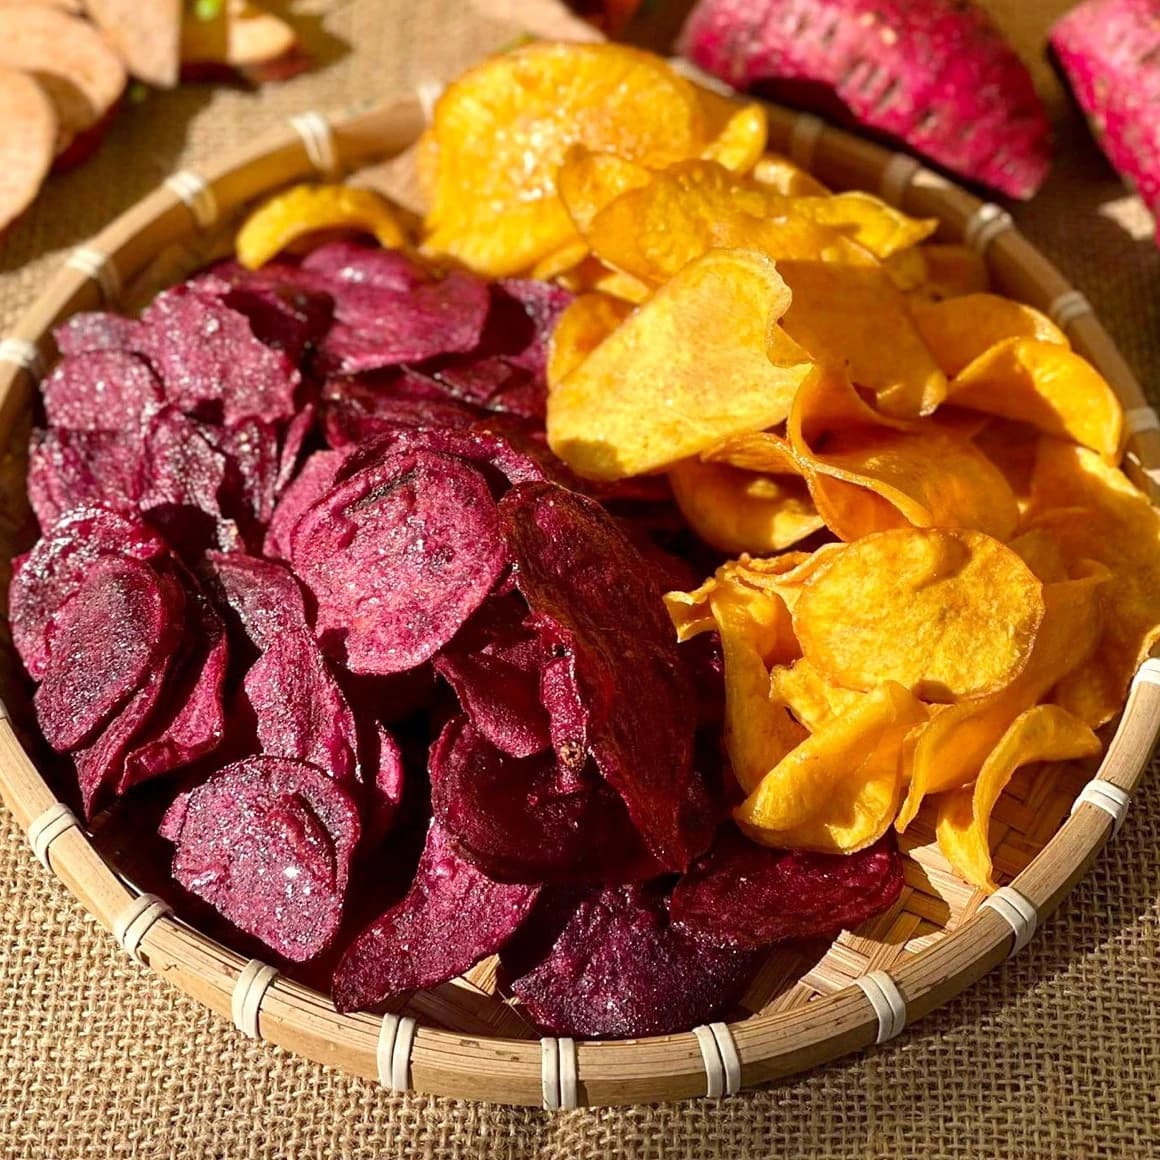 Dried vegetable snack sweet potatoes crunchy and delicious no preservative from Vietnam